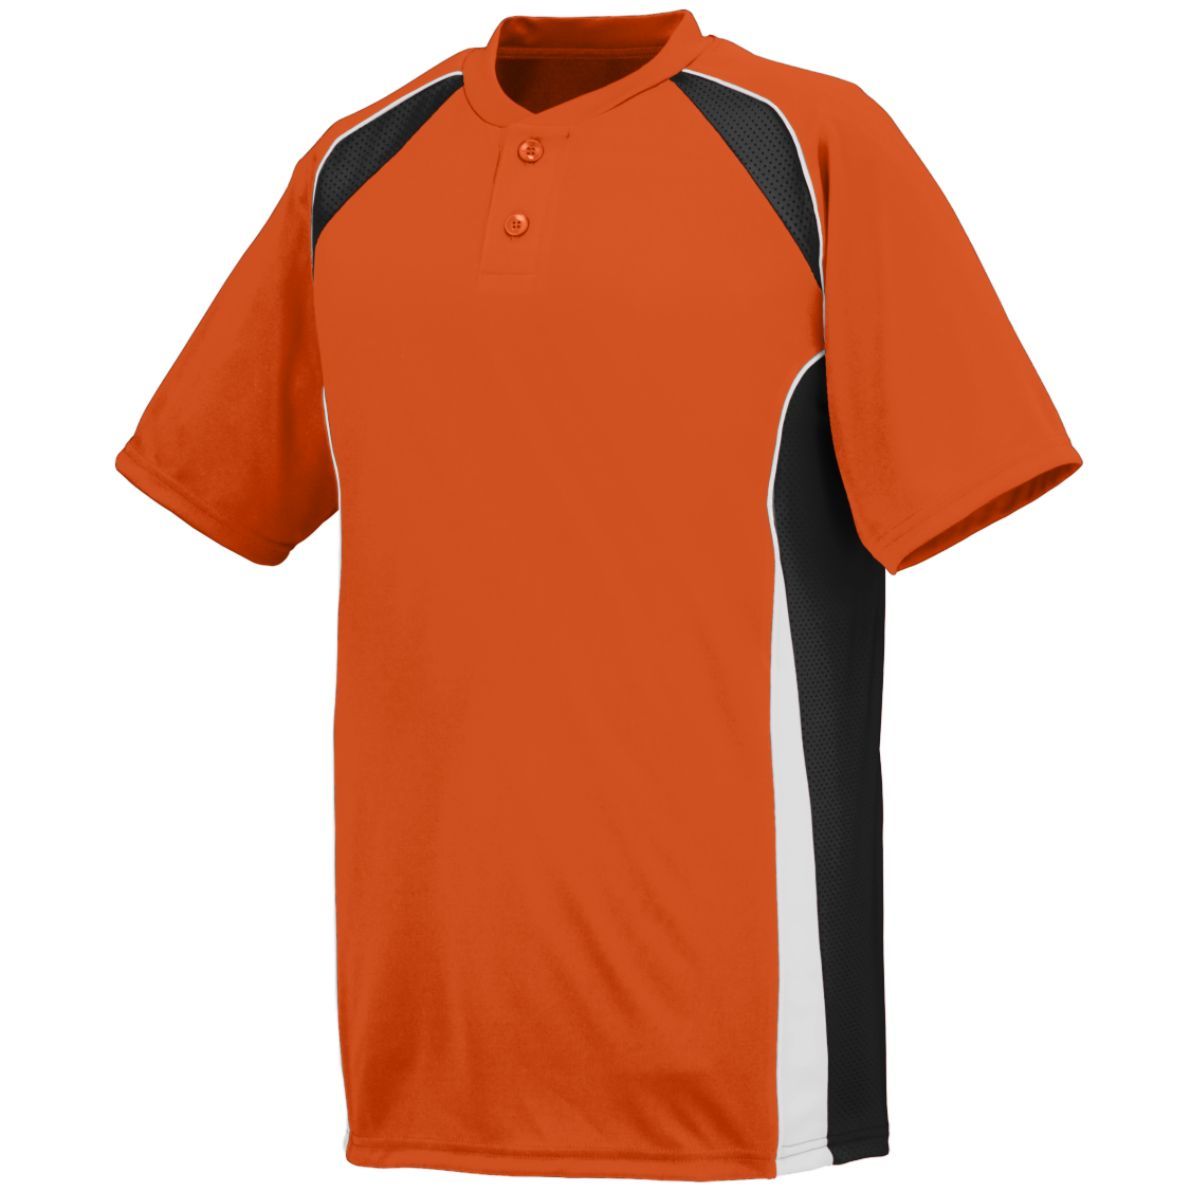 Augusta Sportswear Base Hit Jersey in Orange/Black/White  -Part of the Adult, Adult-Jersey, Augusta-Products, Baseball, Shirts, All-Sports, All-Sports-1 product lines at KanaleyCreations.com